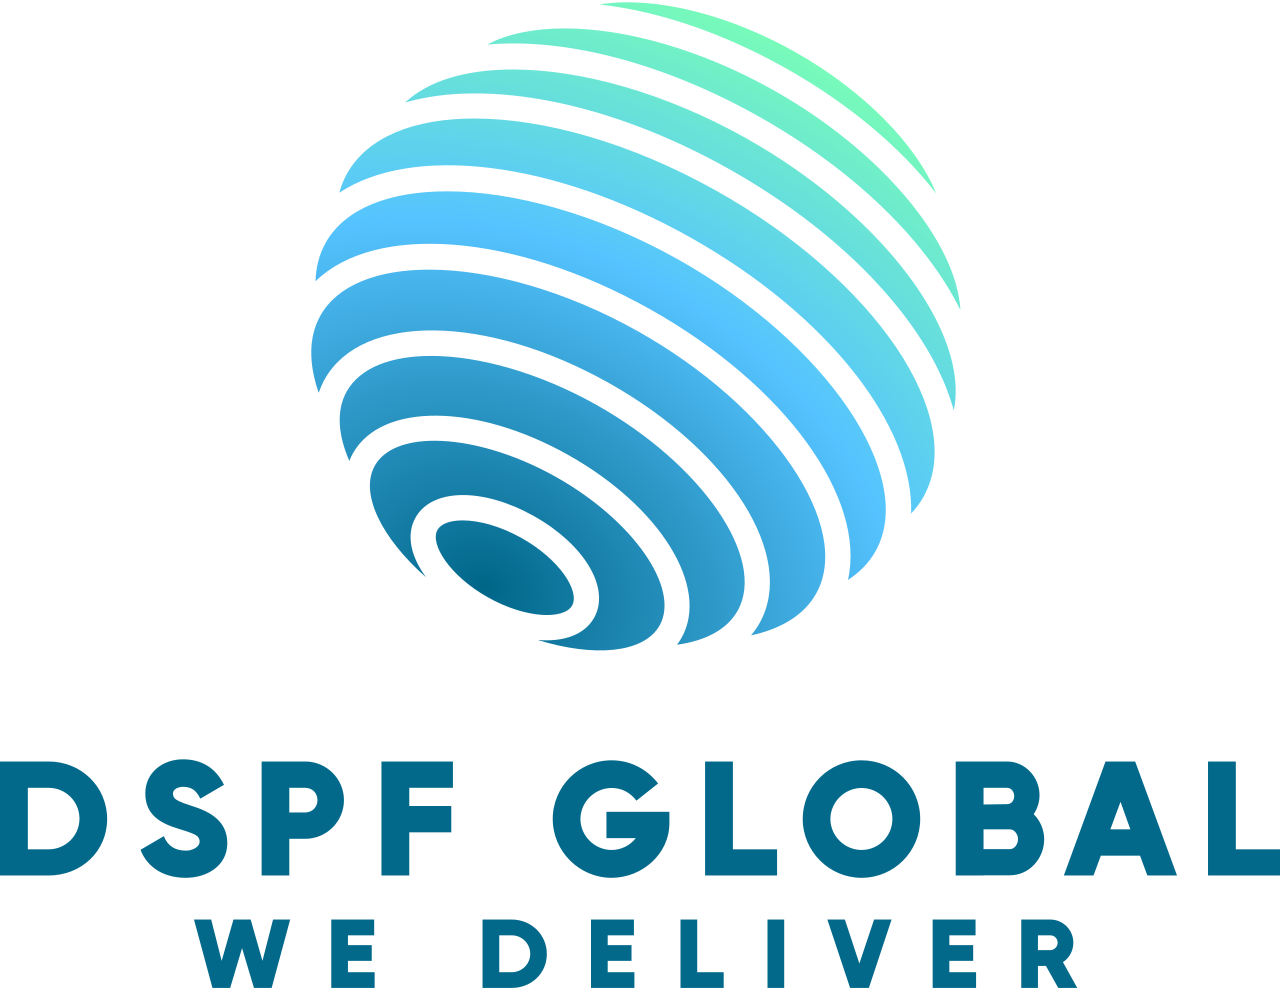 DSPF Global's web page